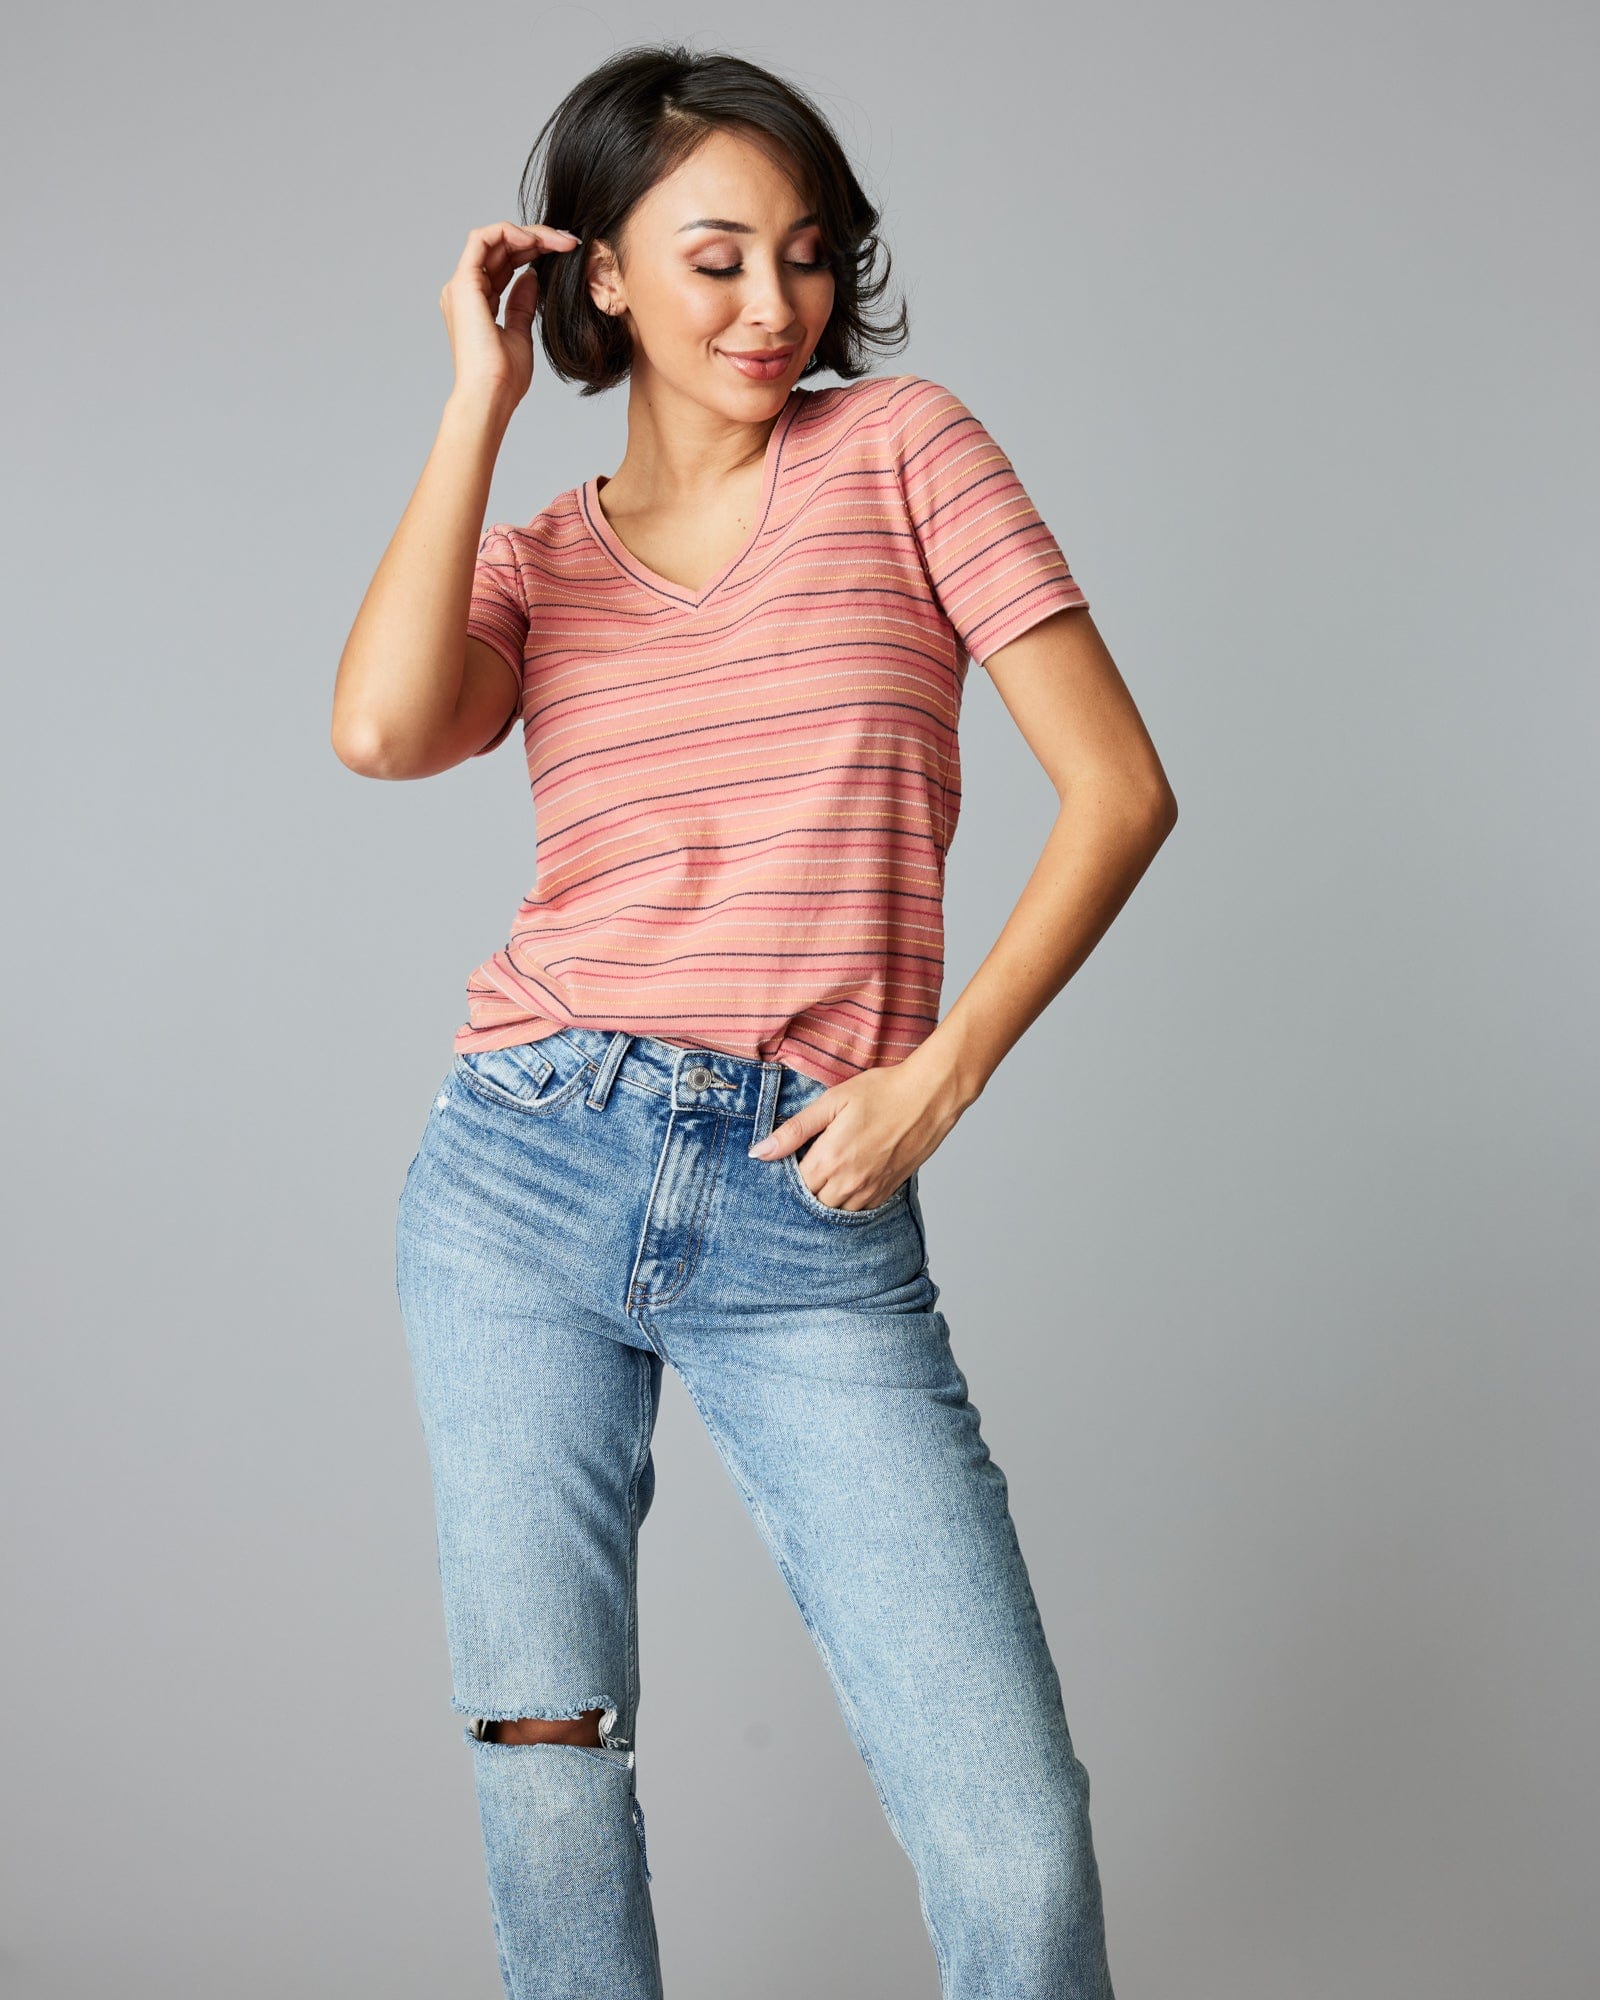 Woman in a short sleeve, pink, striped tee.